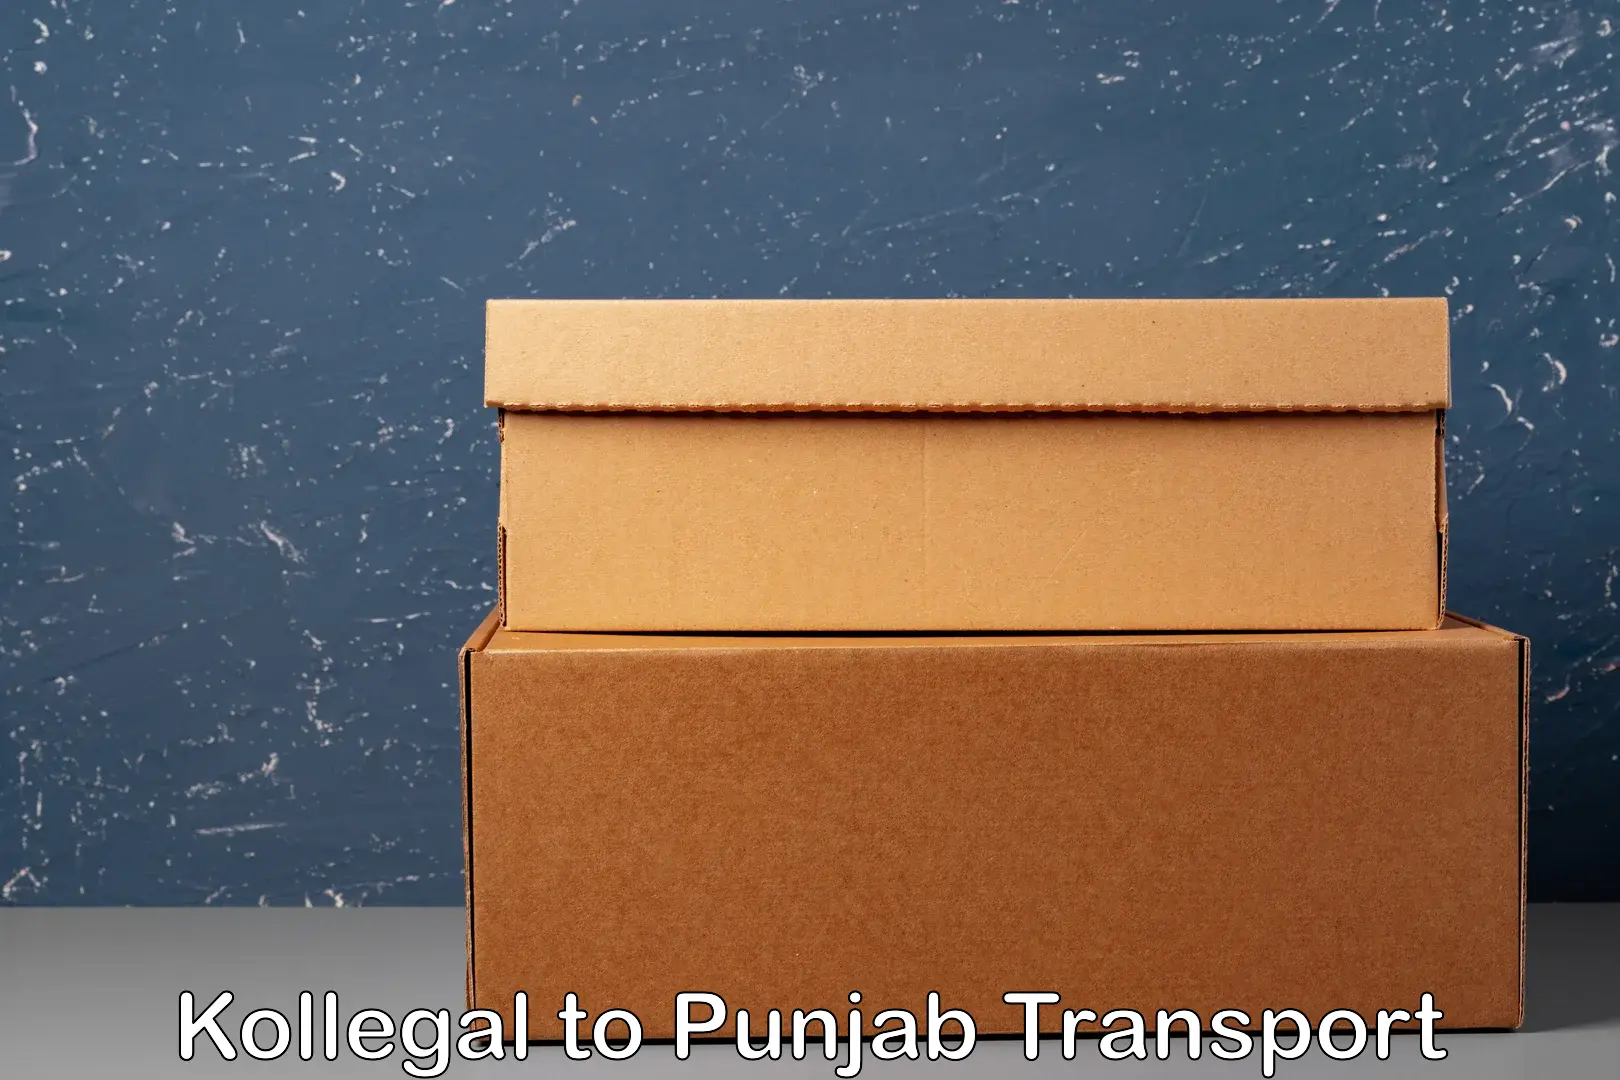 Goods delivery service Kollegal to Zirakpur